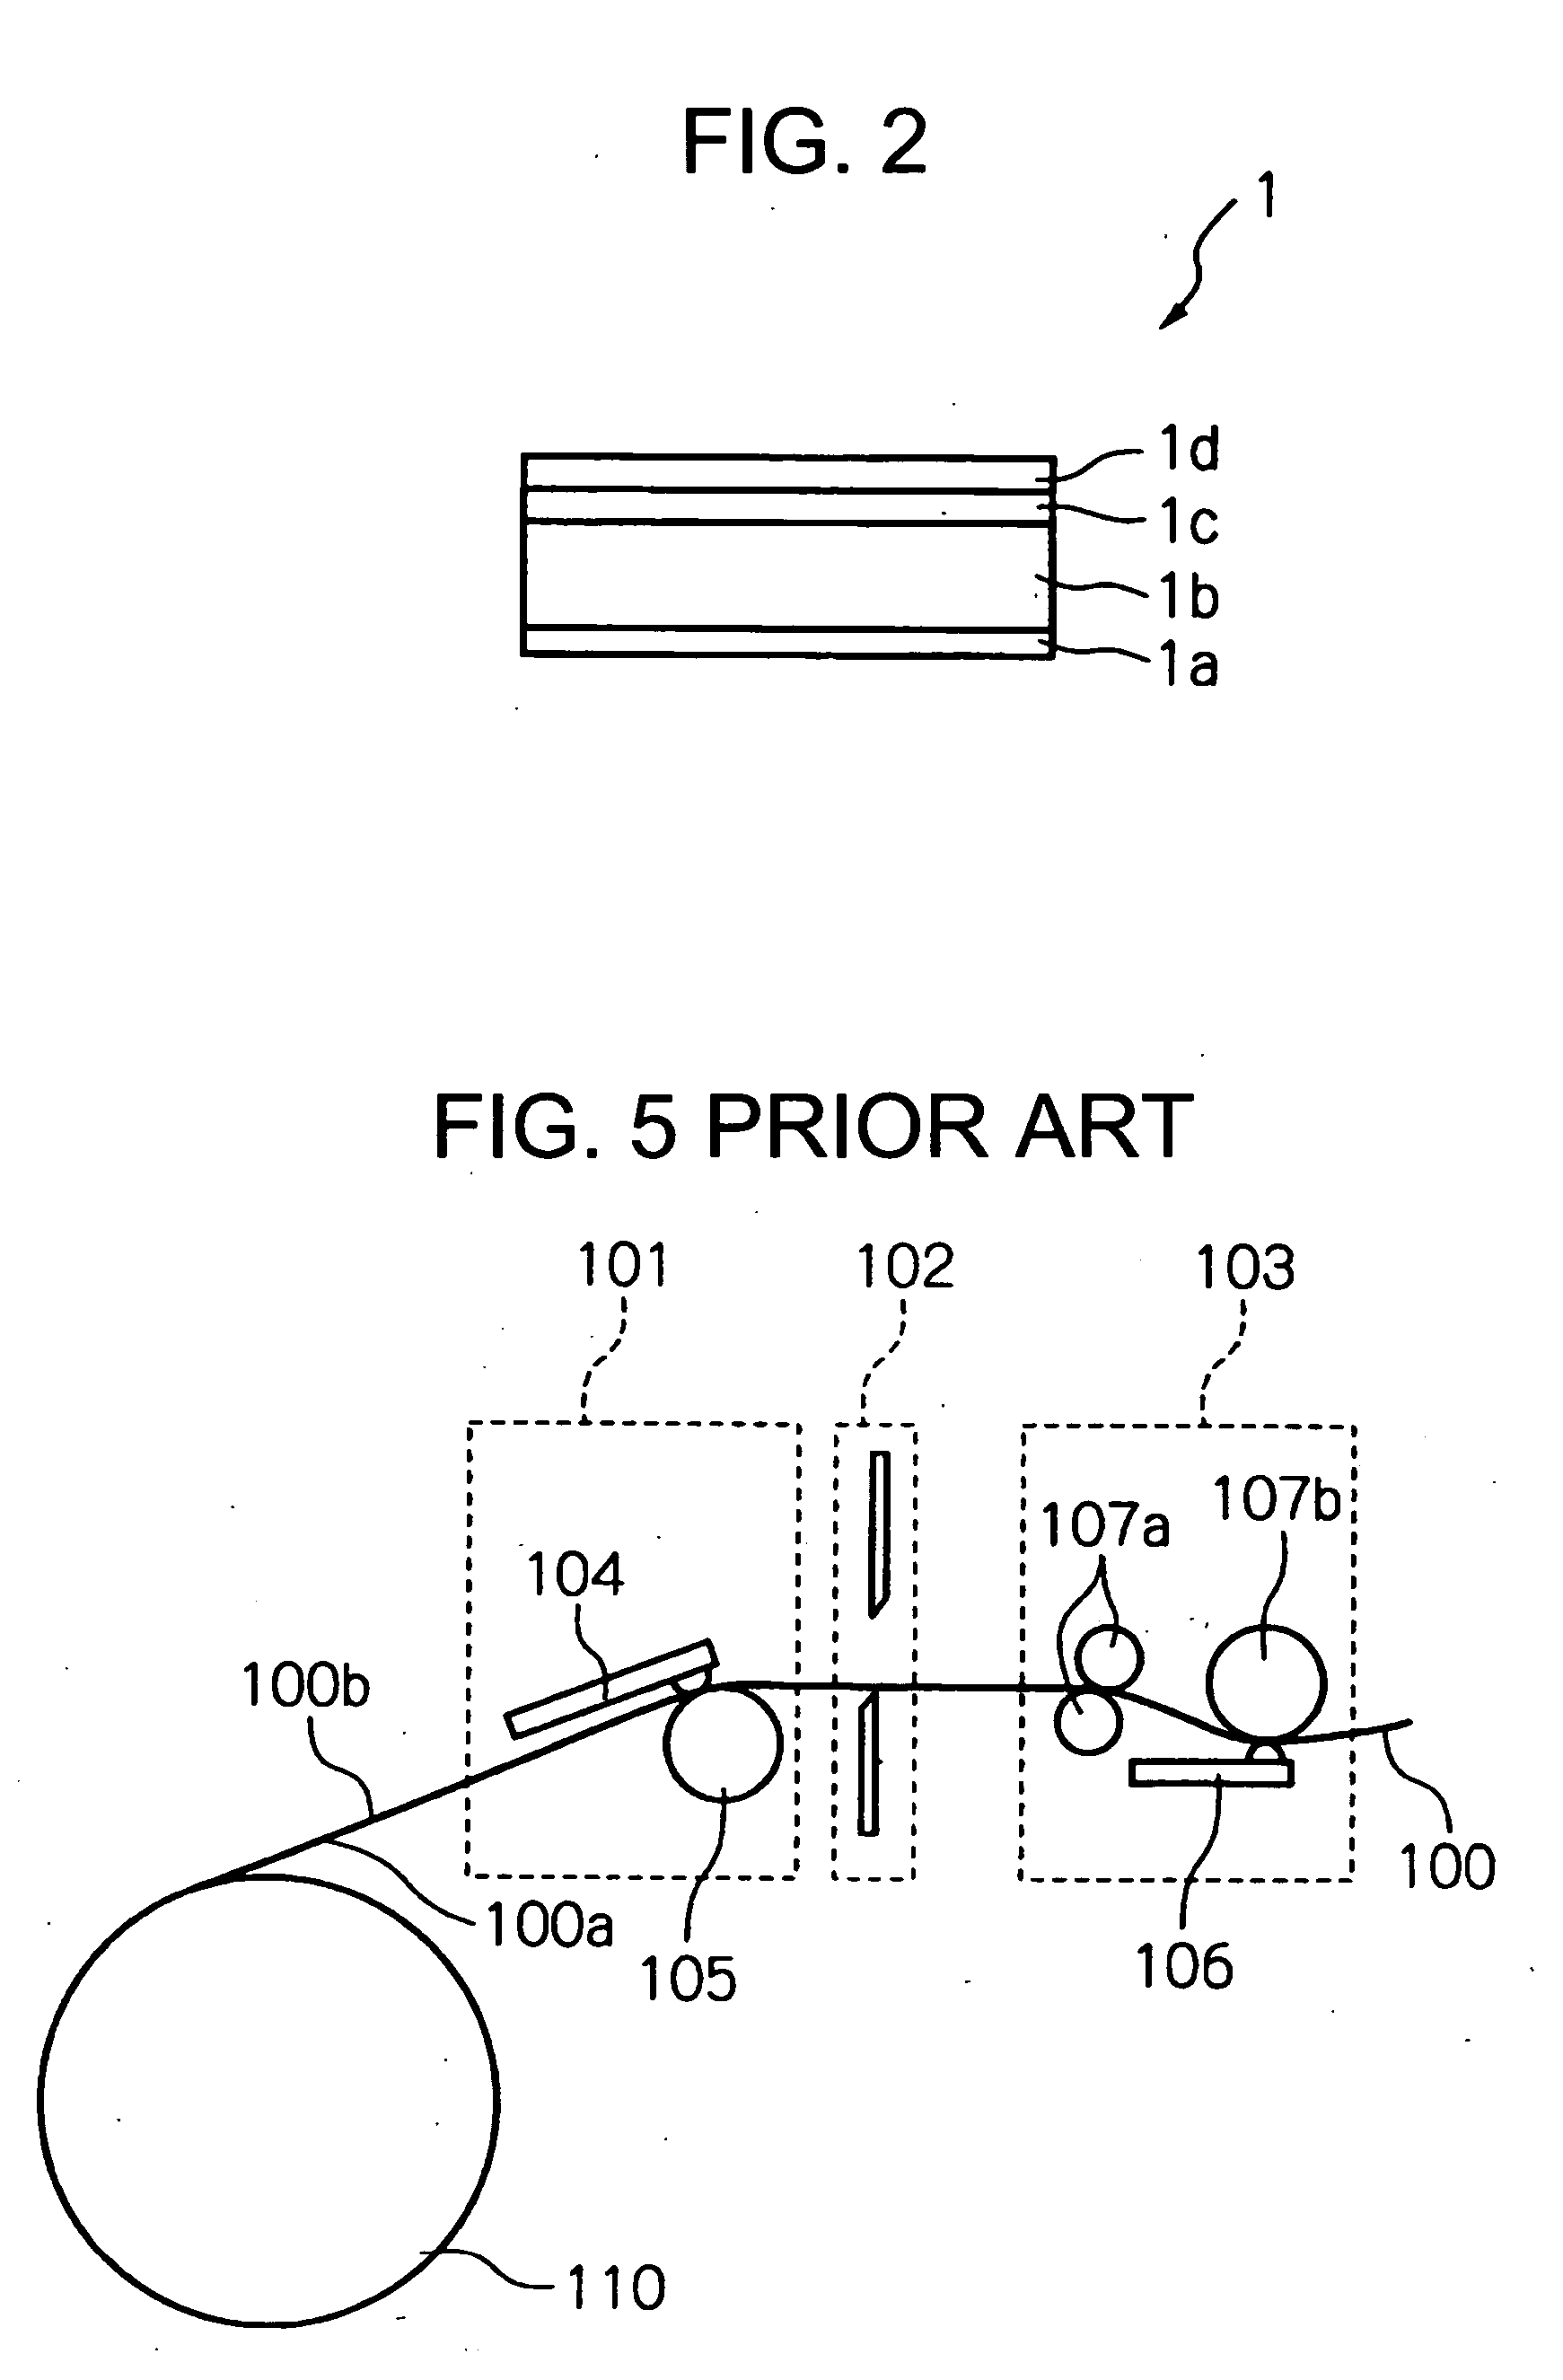 Printer and adhesive label manufacturing device